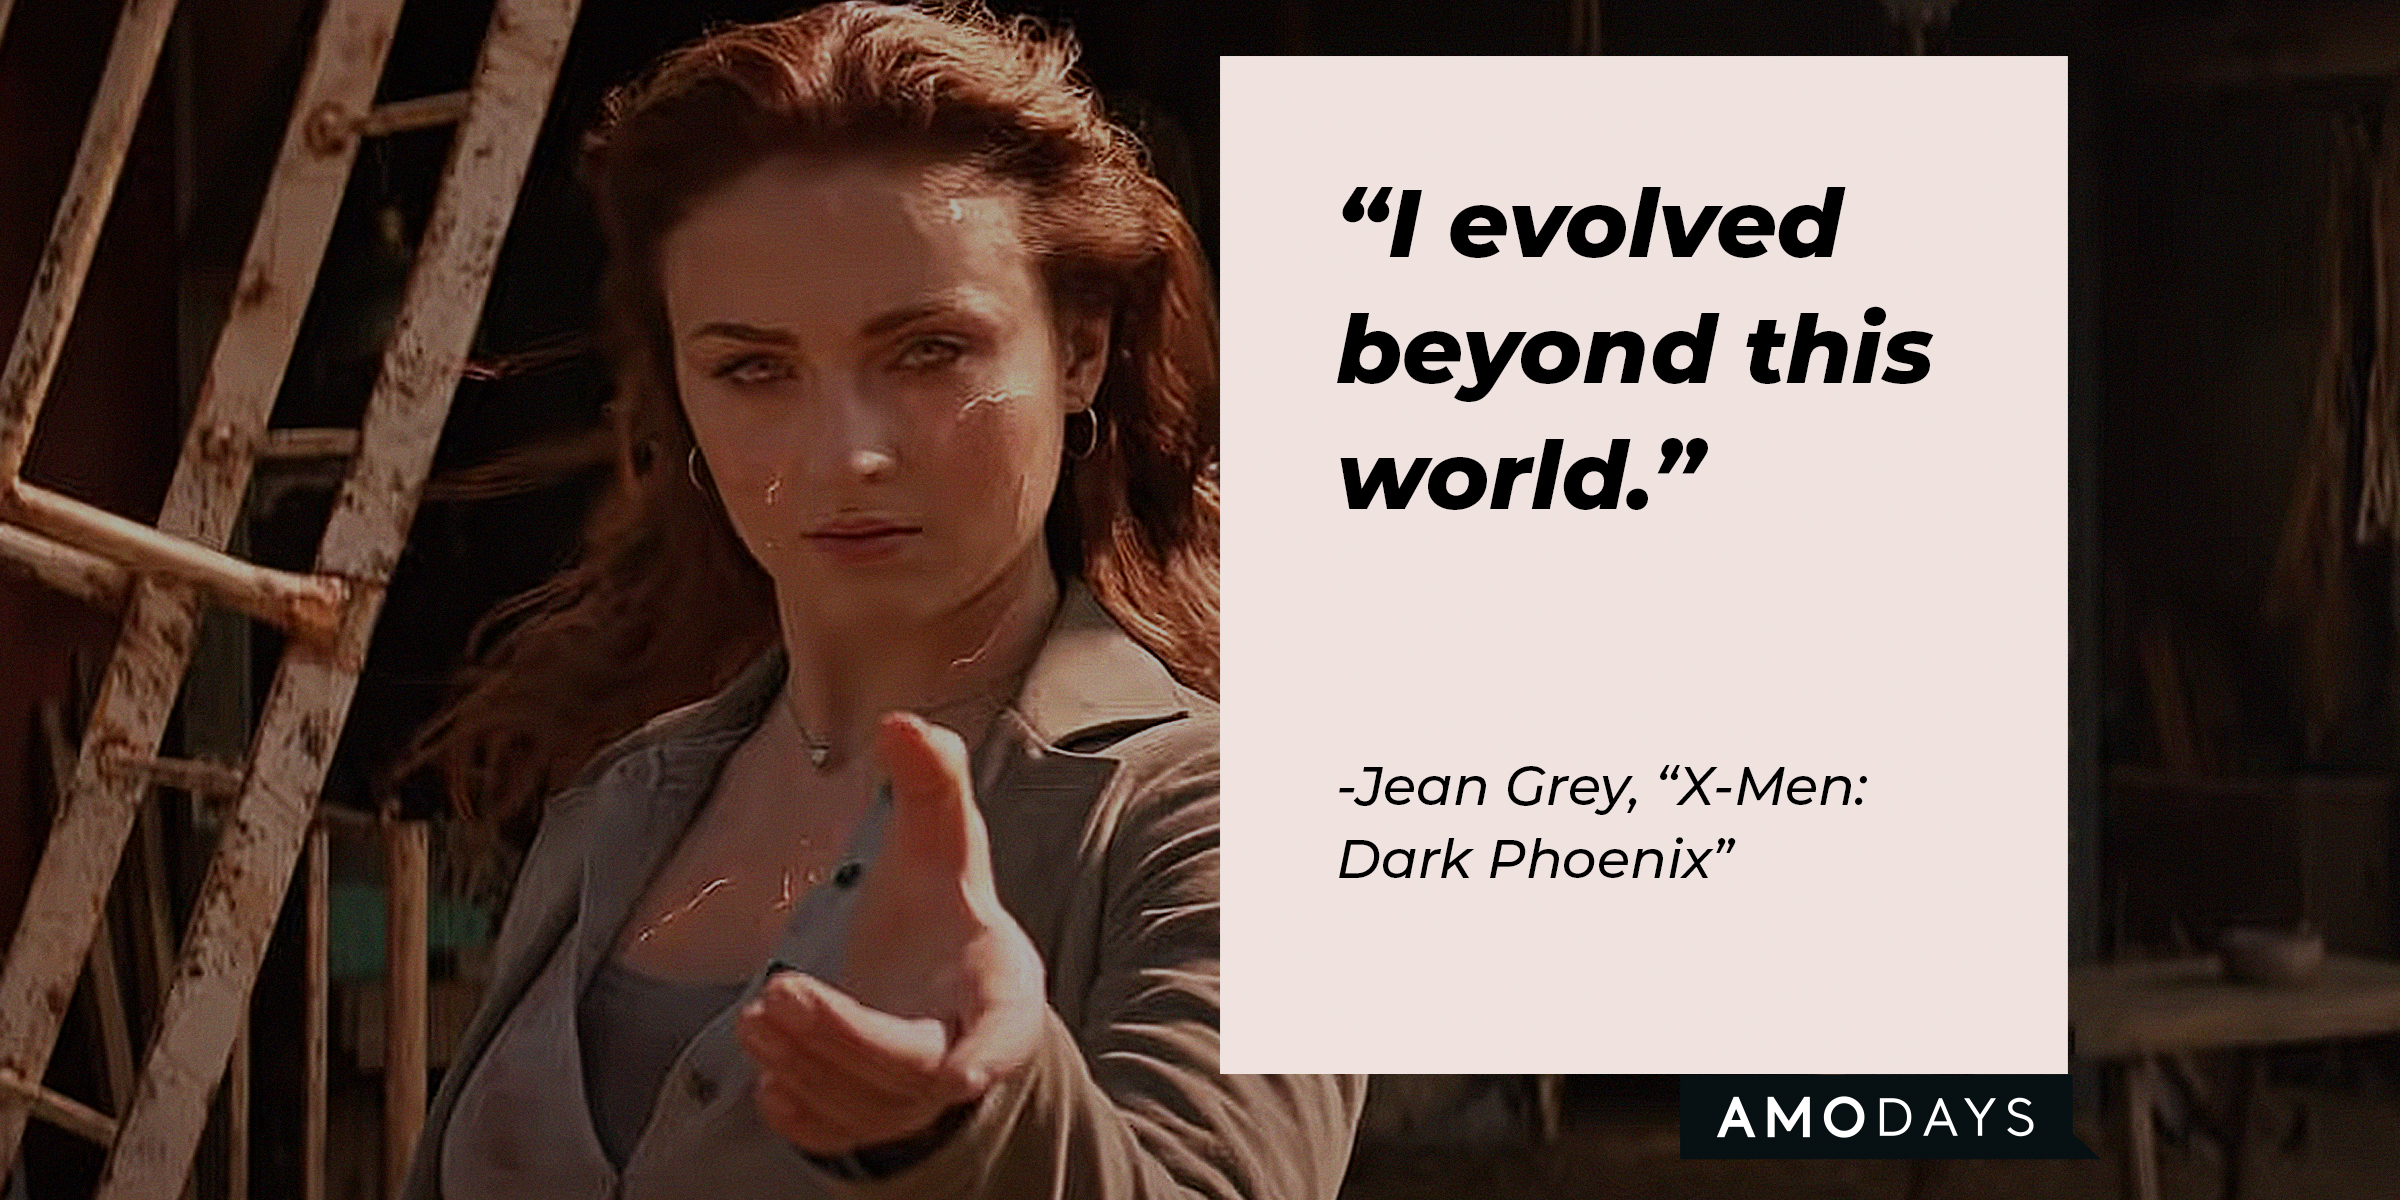 Jean Grey's quote: "I evolved beyond this world." | Image: Youtube.com/20thCenturyStudios